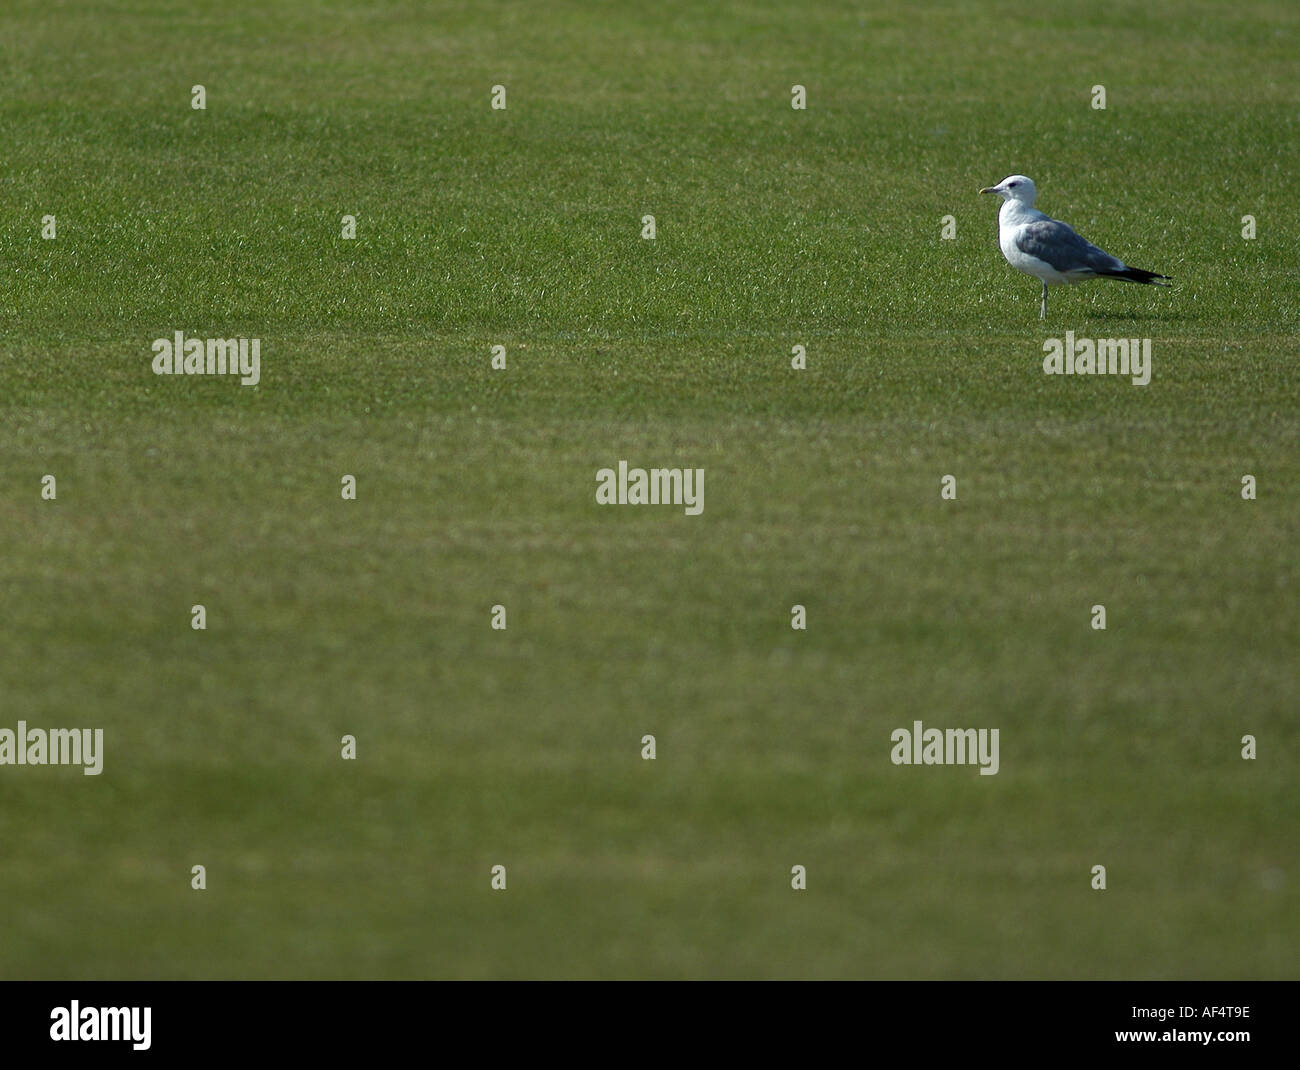 bird on pitch picture by Paddy McGuinness Stock Photo